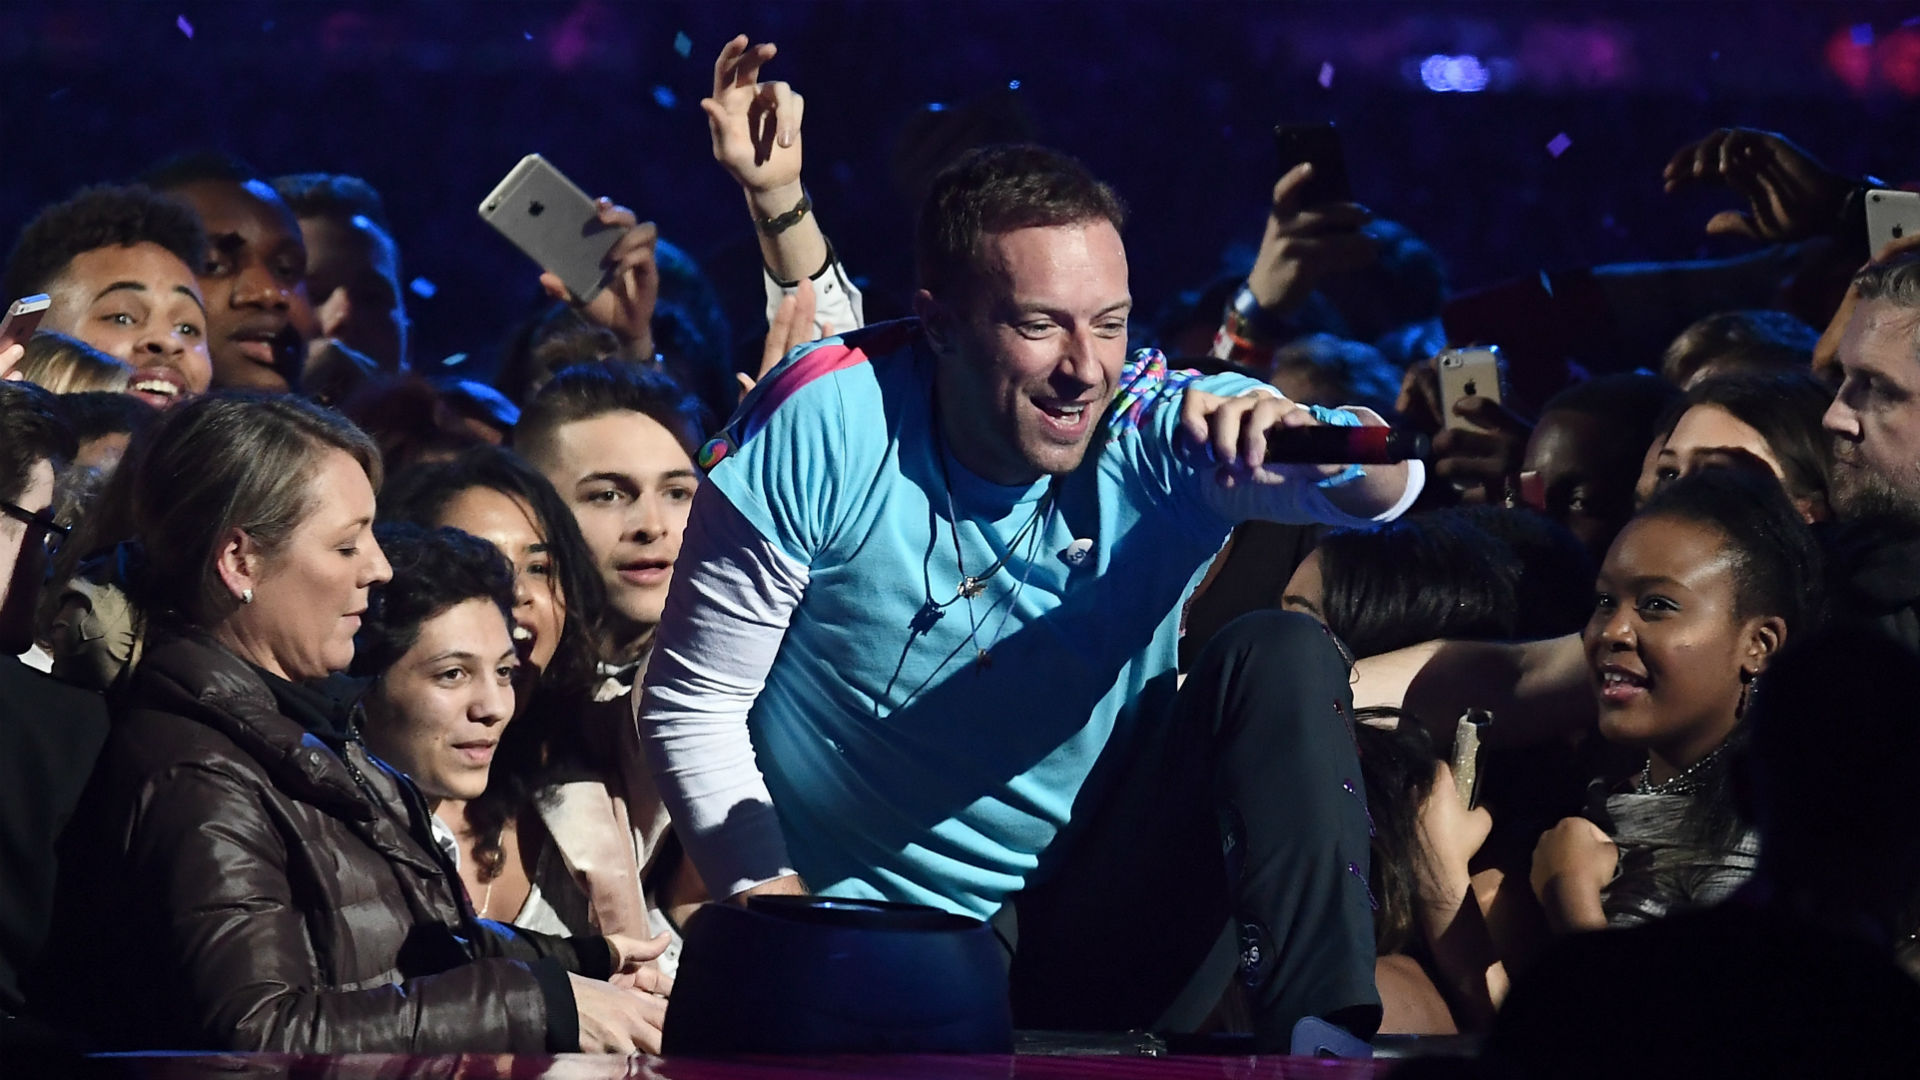 Coldplay in Israel, Palestine to 'listen and learn'